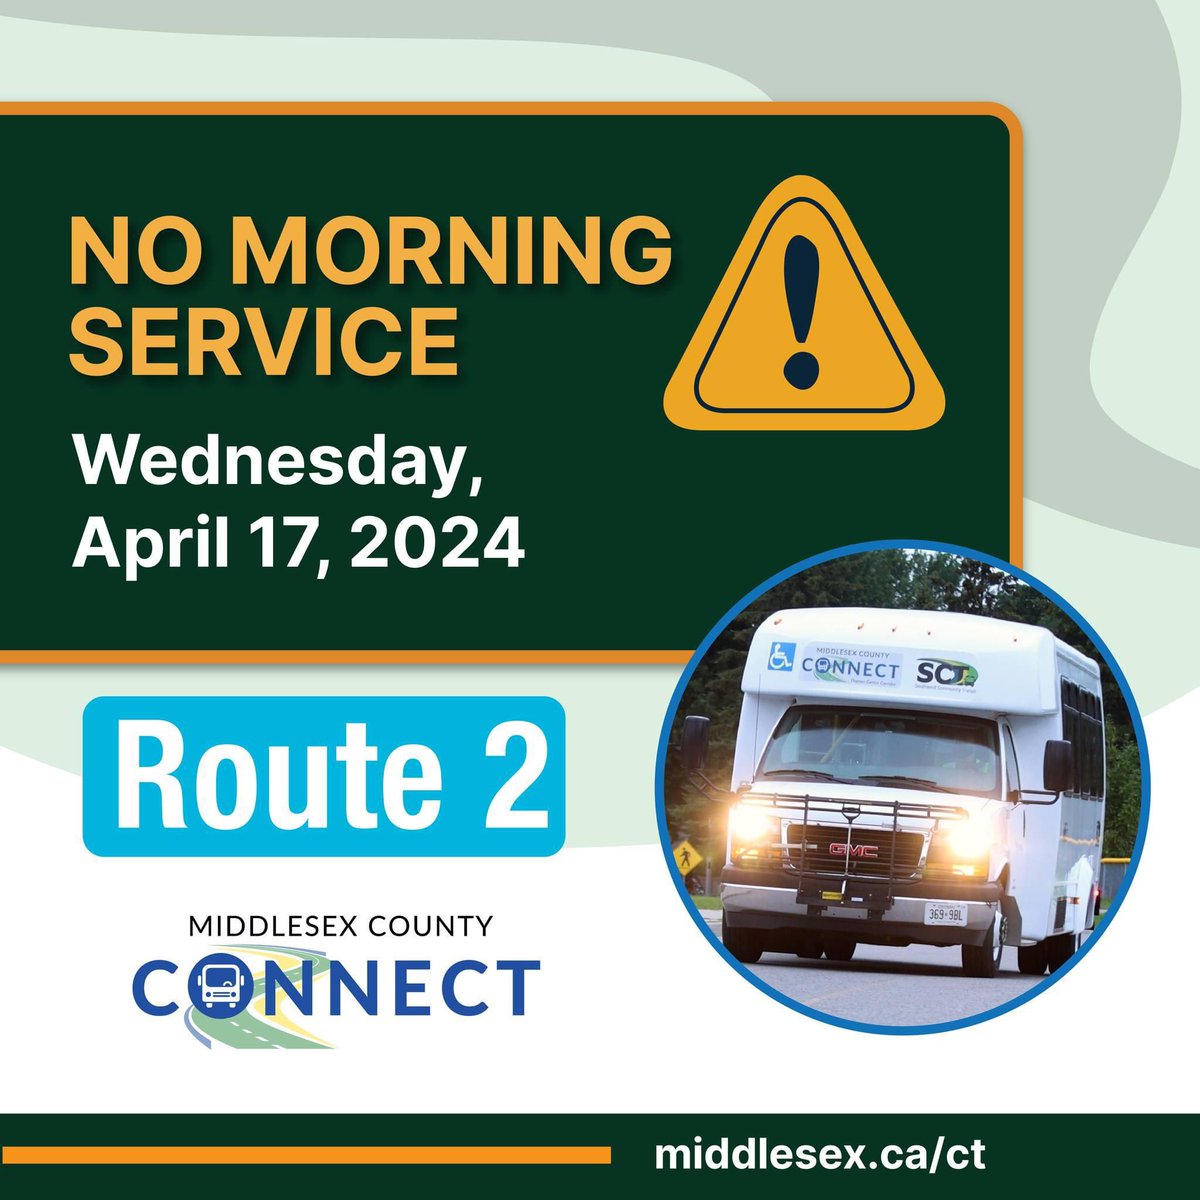 Middlesex County Connect Route 2 bus will not be in service tomorrow morning on Wednesday, April 17, 2024. We apologize for the inconvenience. ROUTE 2: WOODSTOCK - INGERSOLL - PUTNAM - DORCHESTER - LONDON